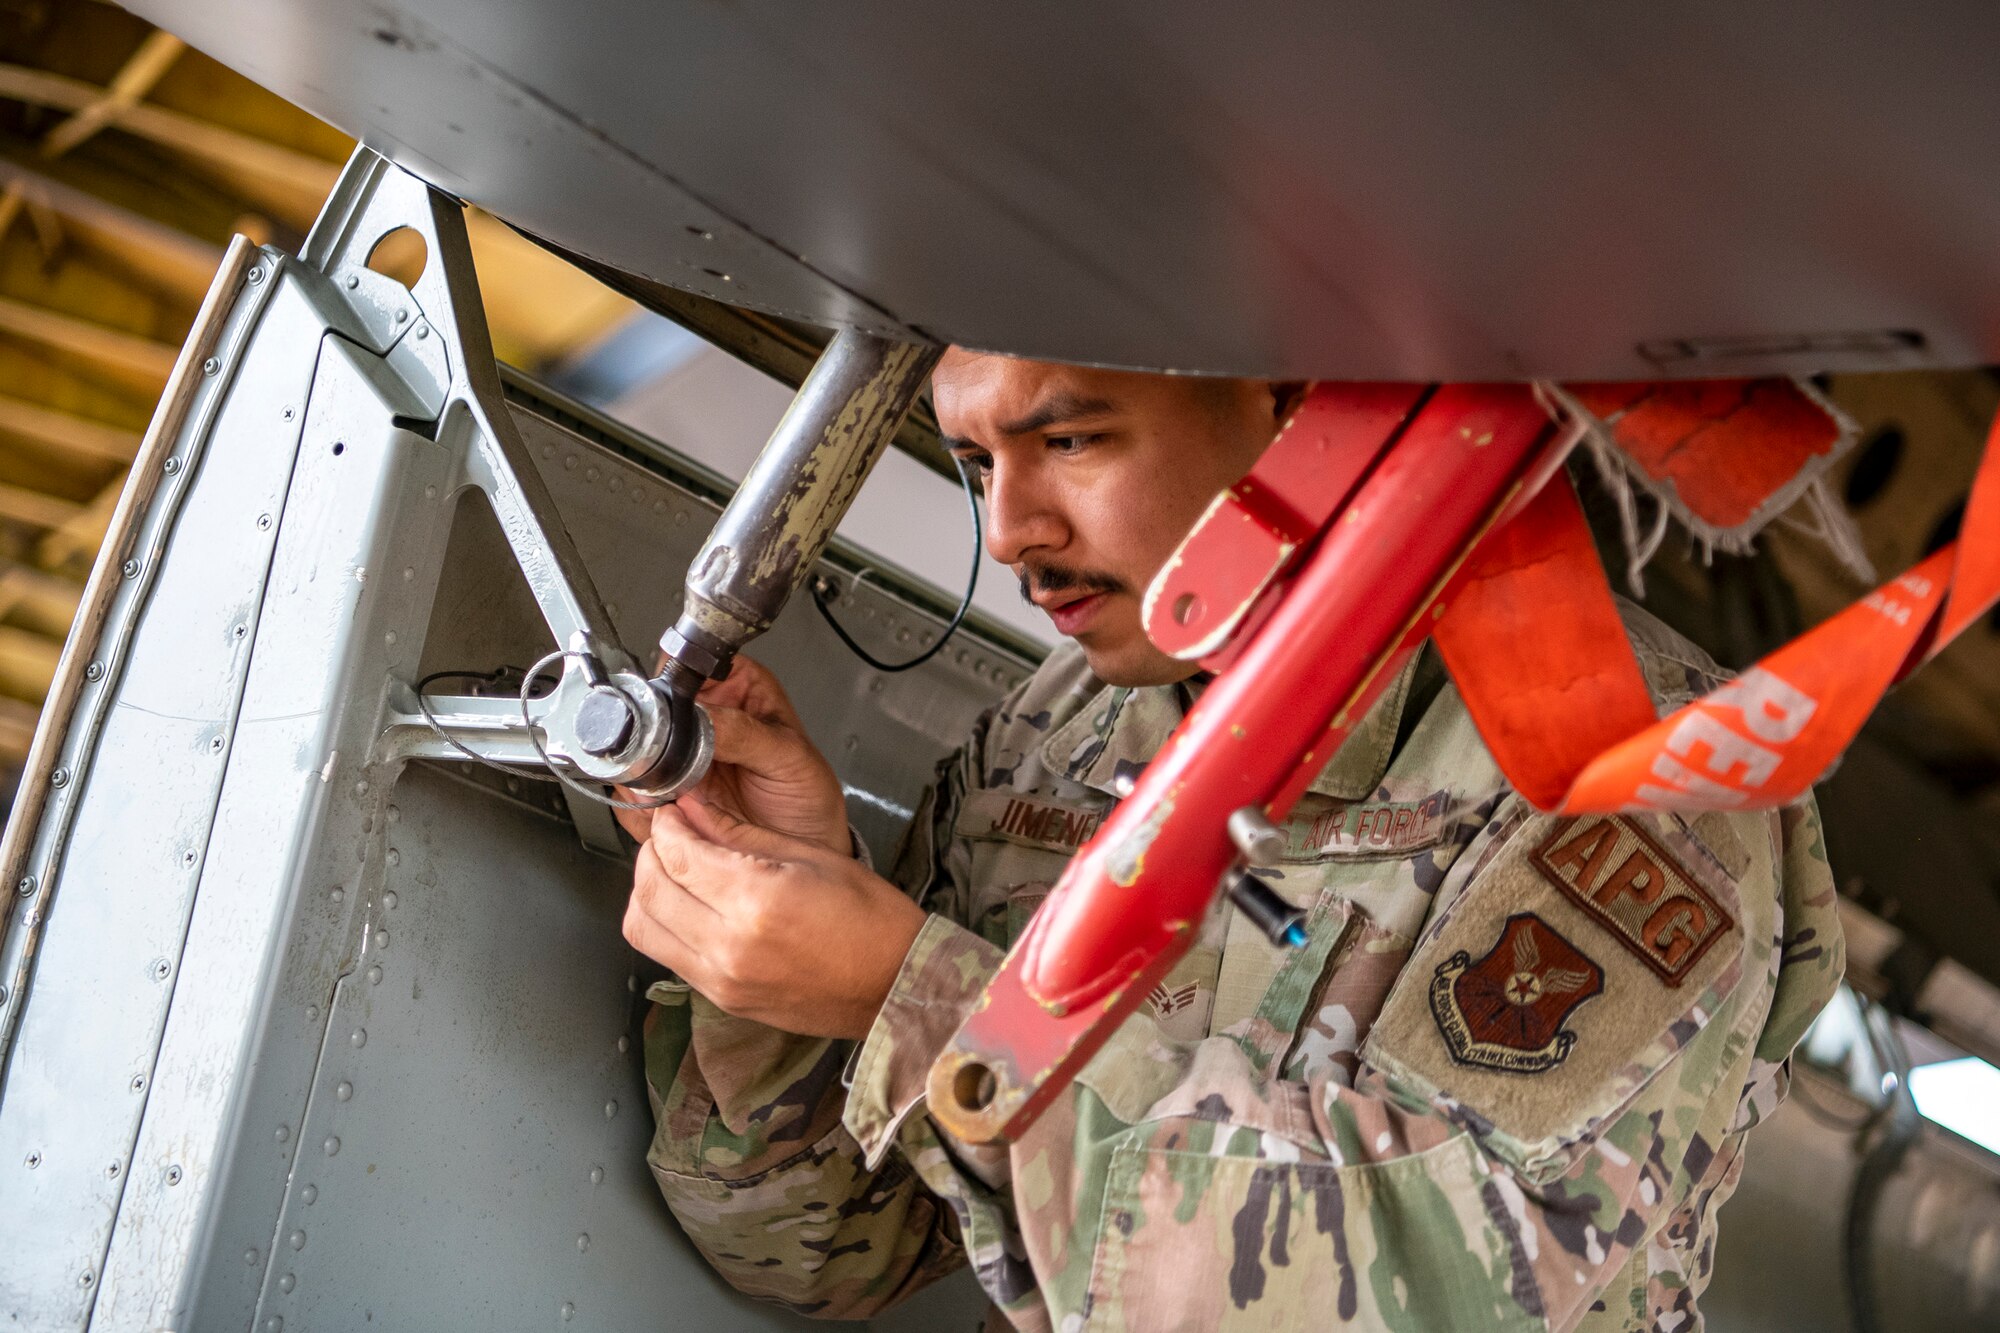 U.S. Air Force Senior Airman Erik Jimenez, 23rd Aircraft Maintenance unit apprentice, adjusts a component on a B-52 Stratofortress aircraft assigned to the 23rd Expeditionary Bomb Squadron prior to departure at RAF Fairford, United Kingdom, Sept. 21, 2022. Jimenez was part of a Bomber Task Force focused on deterring adversaries, assuring allies and partners, strengthening interoperability and maintaining and demonstrating readiness and lethality across Europe. (U.S. Air Force photo by Staff Sgt. Eugene Oliver)